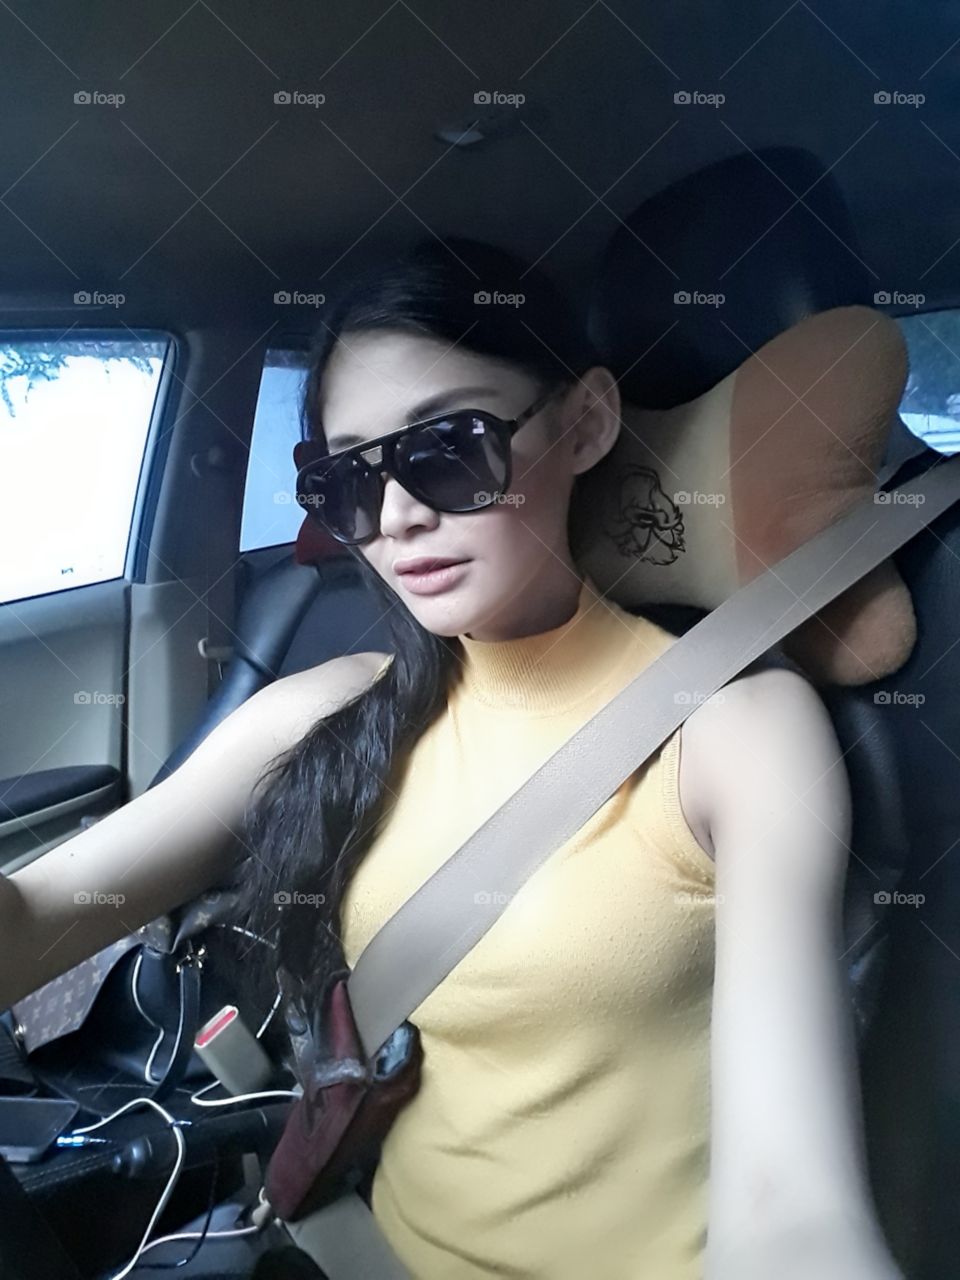 women driver yes,this my hobbies Drive alone but favorite music always with me